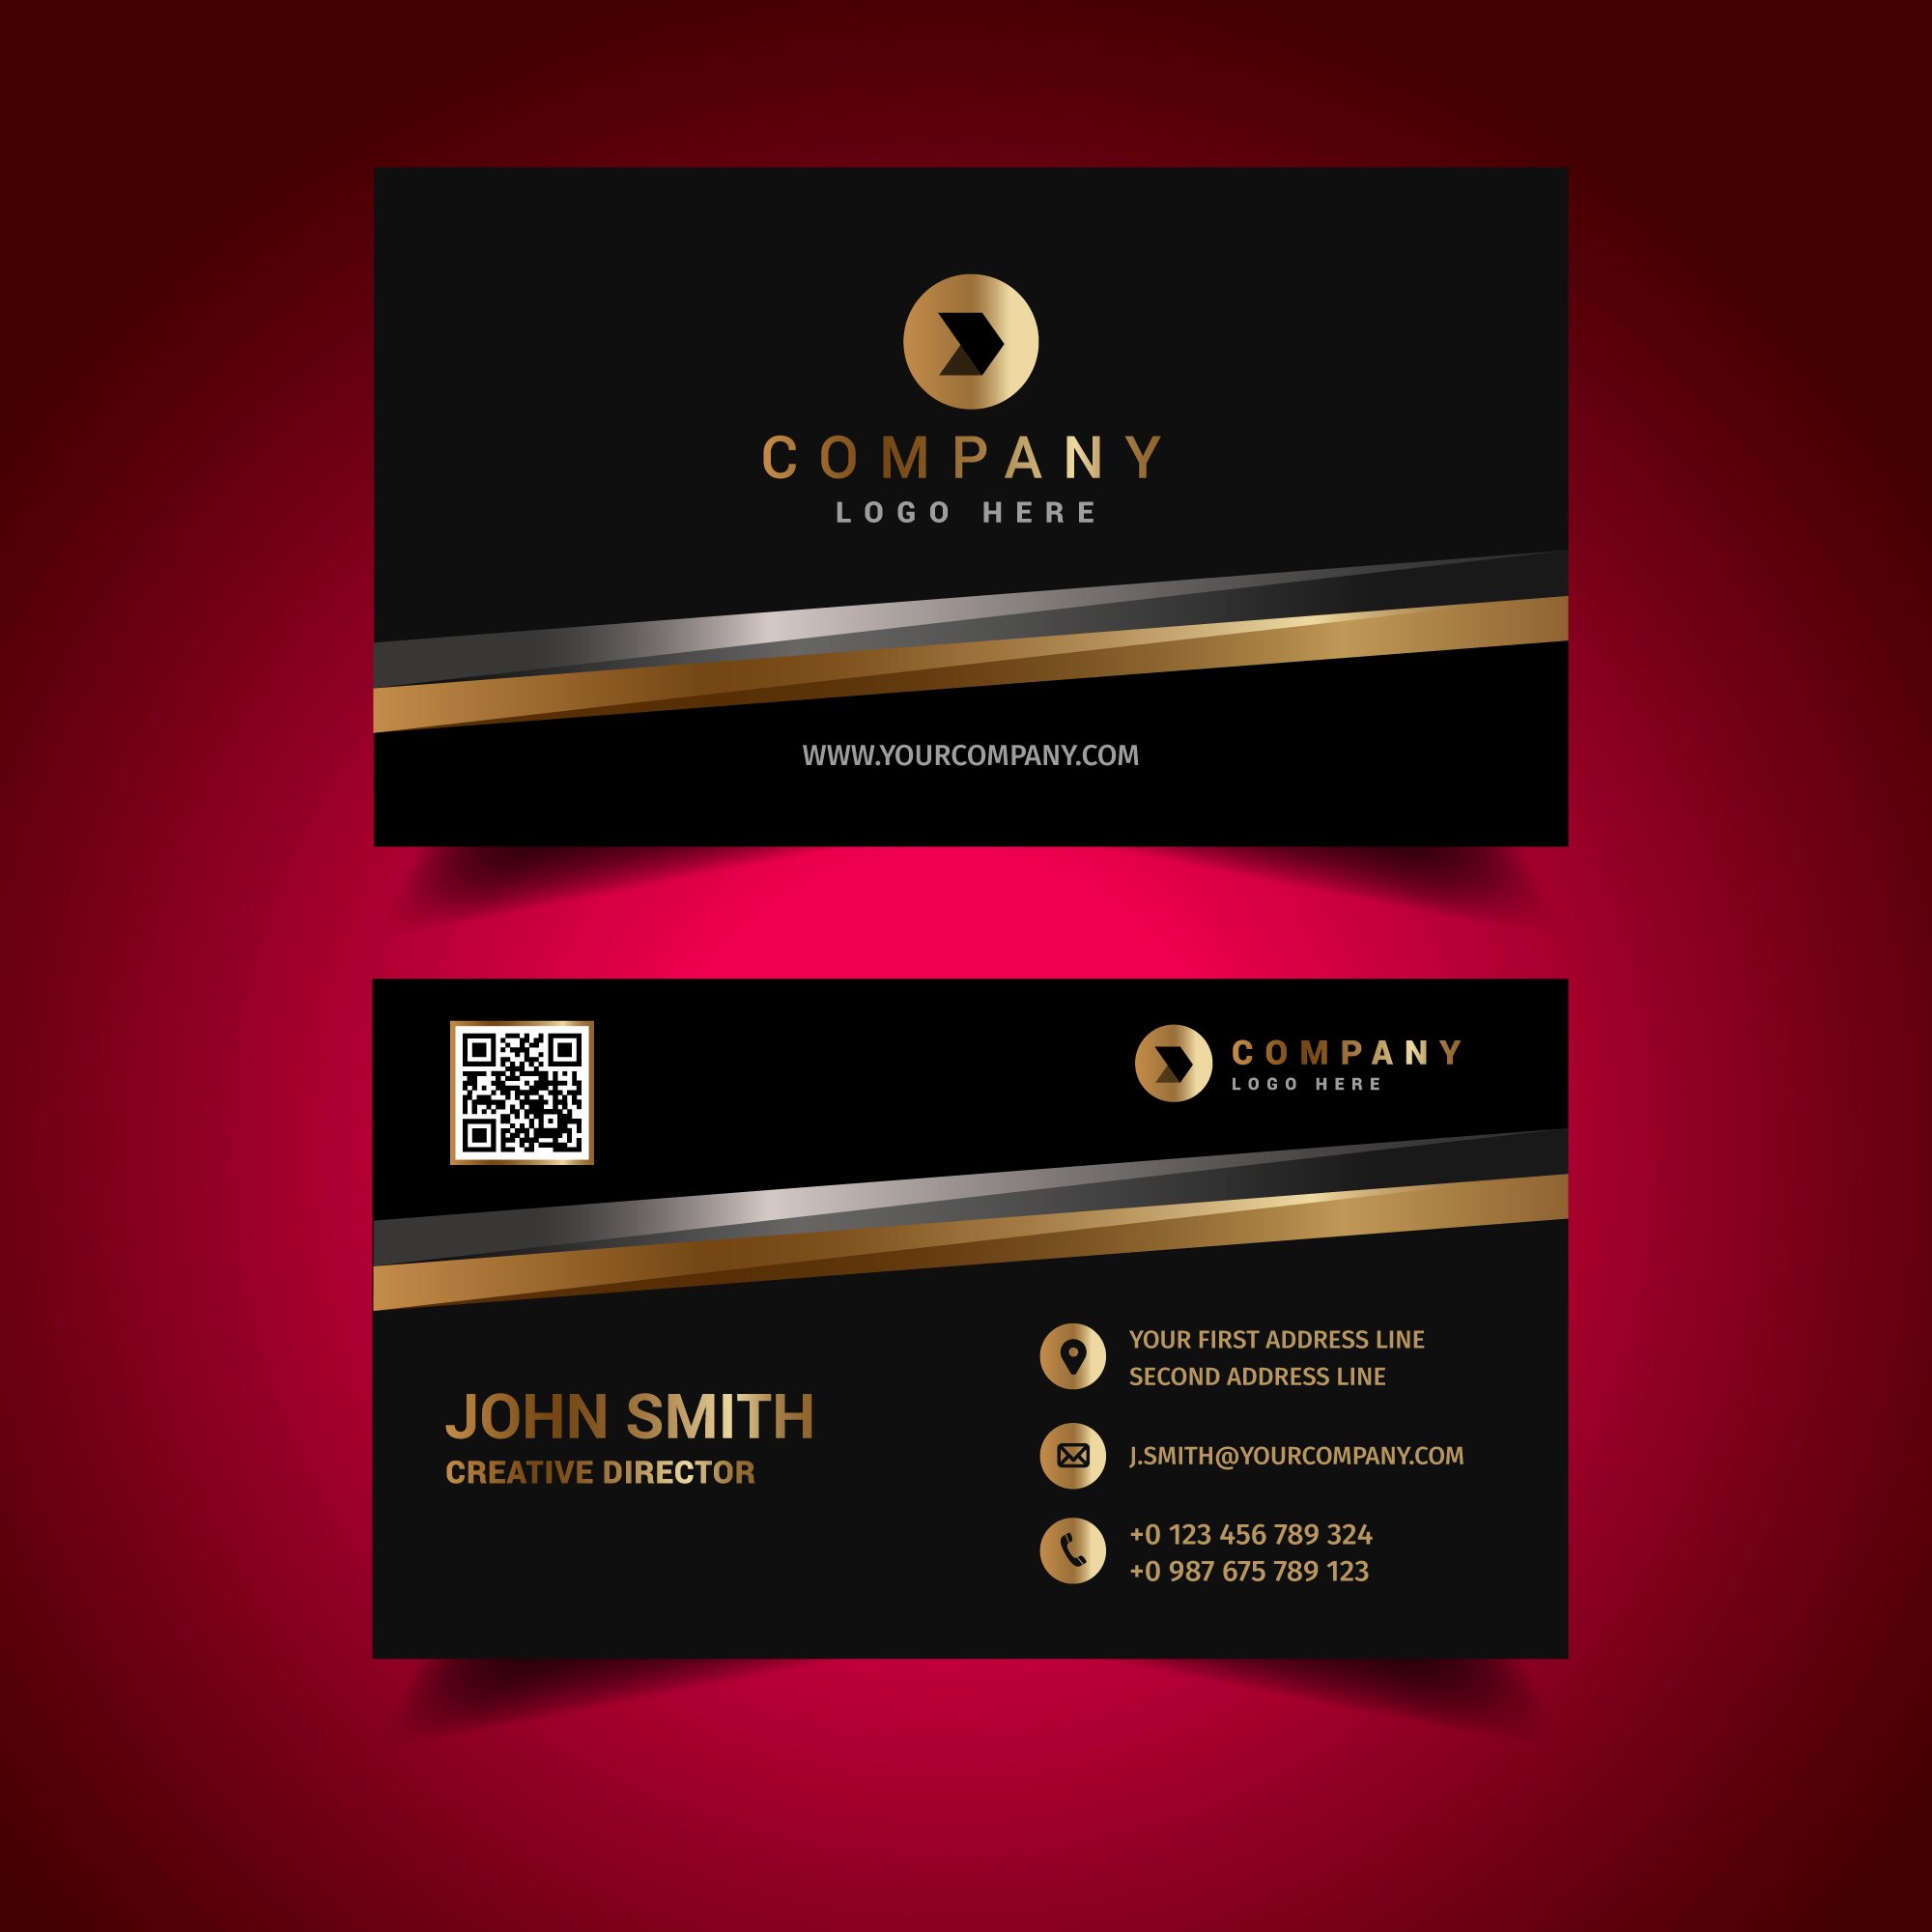 Black and Gold Business Cards Best Of Black and Gold Business Card Download Free Vector Art Stock Graphics &amp;